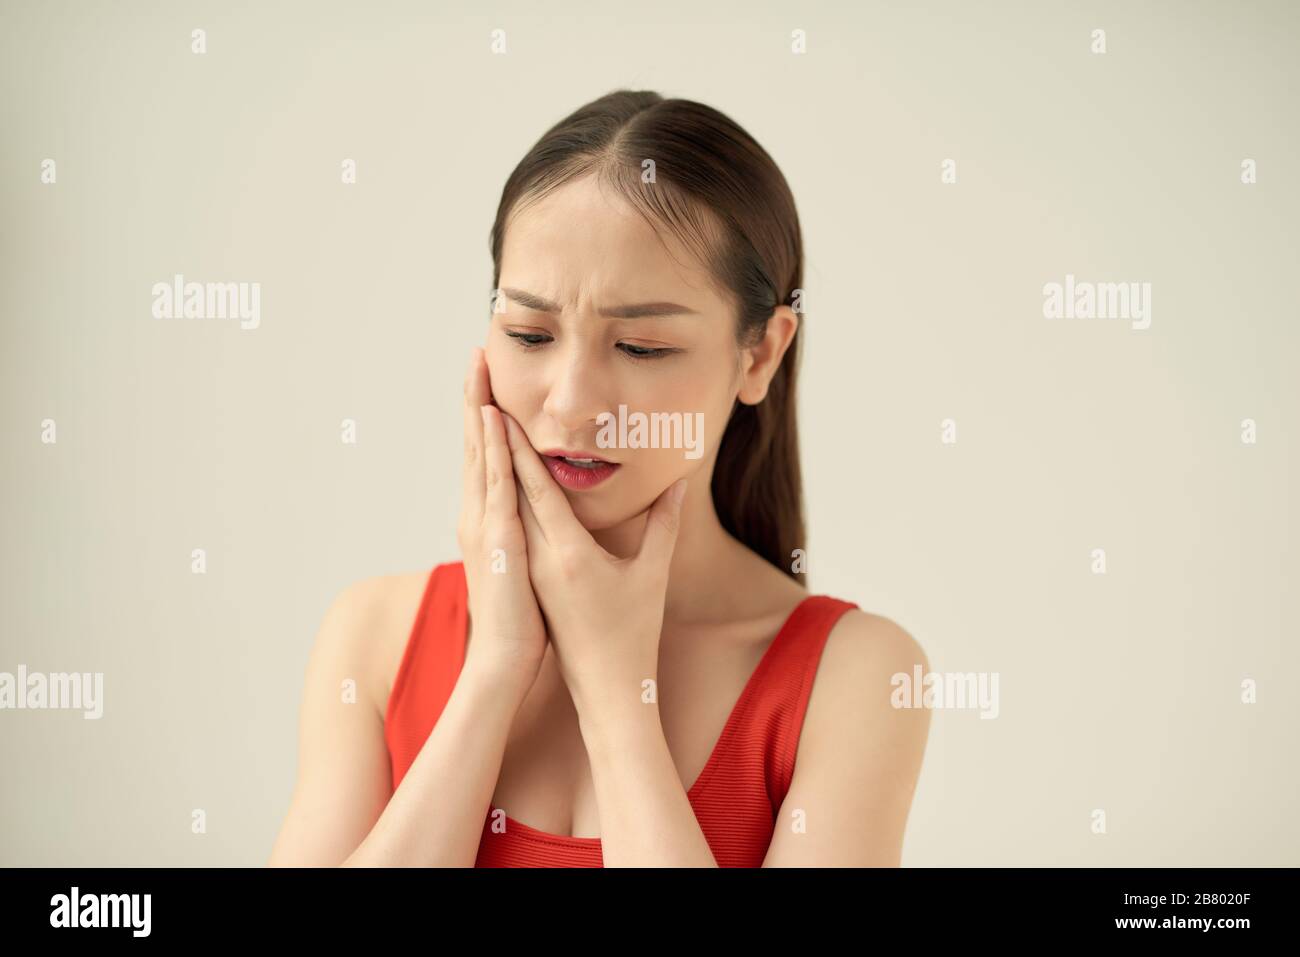 Attractive Female Feeling Painful Toothache. Dental Health And Care Concept Stock Photo